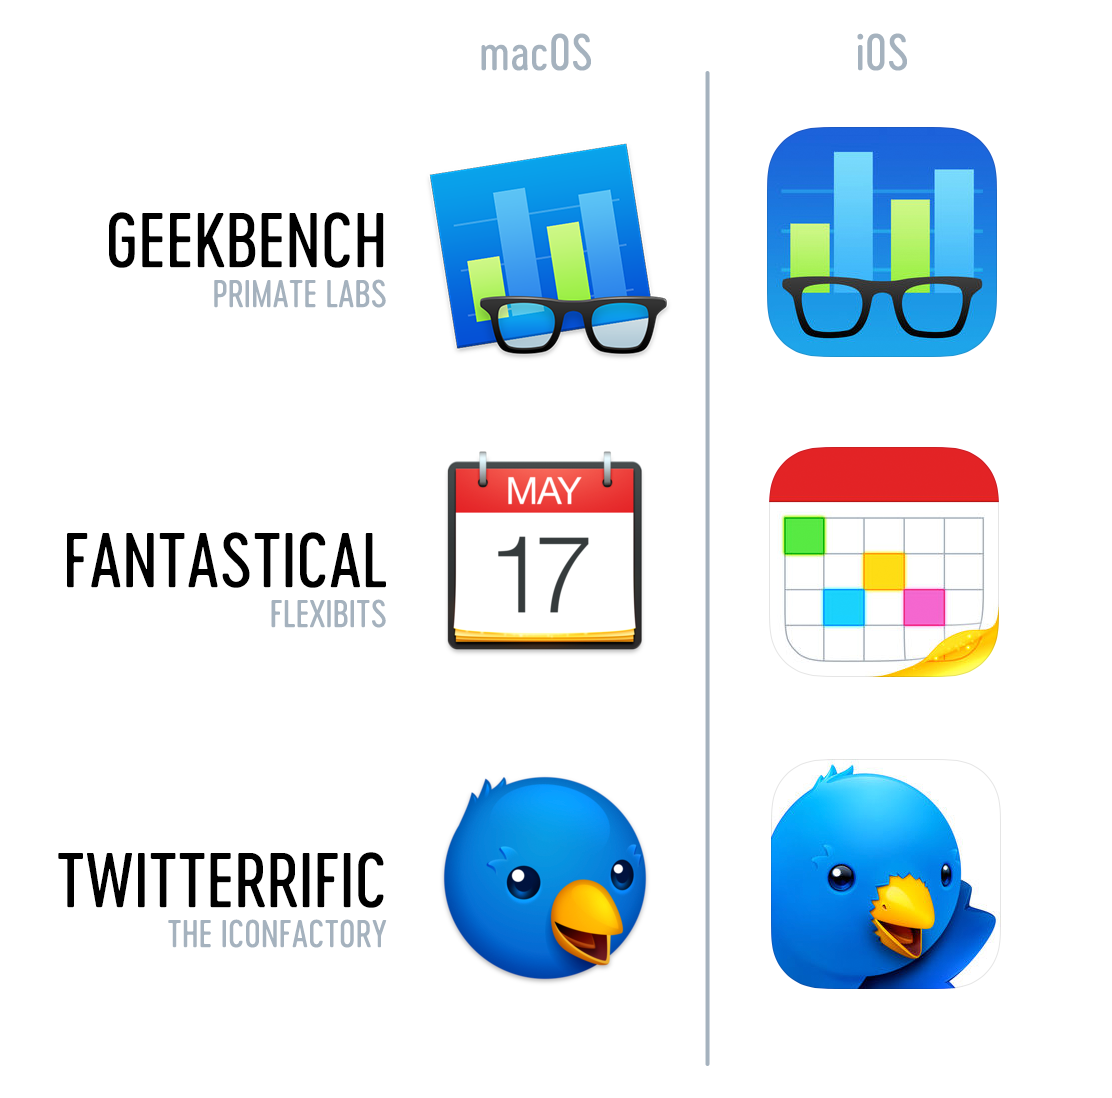 A comparison of Mac and iOS icons done by the Iconfactory